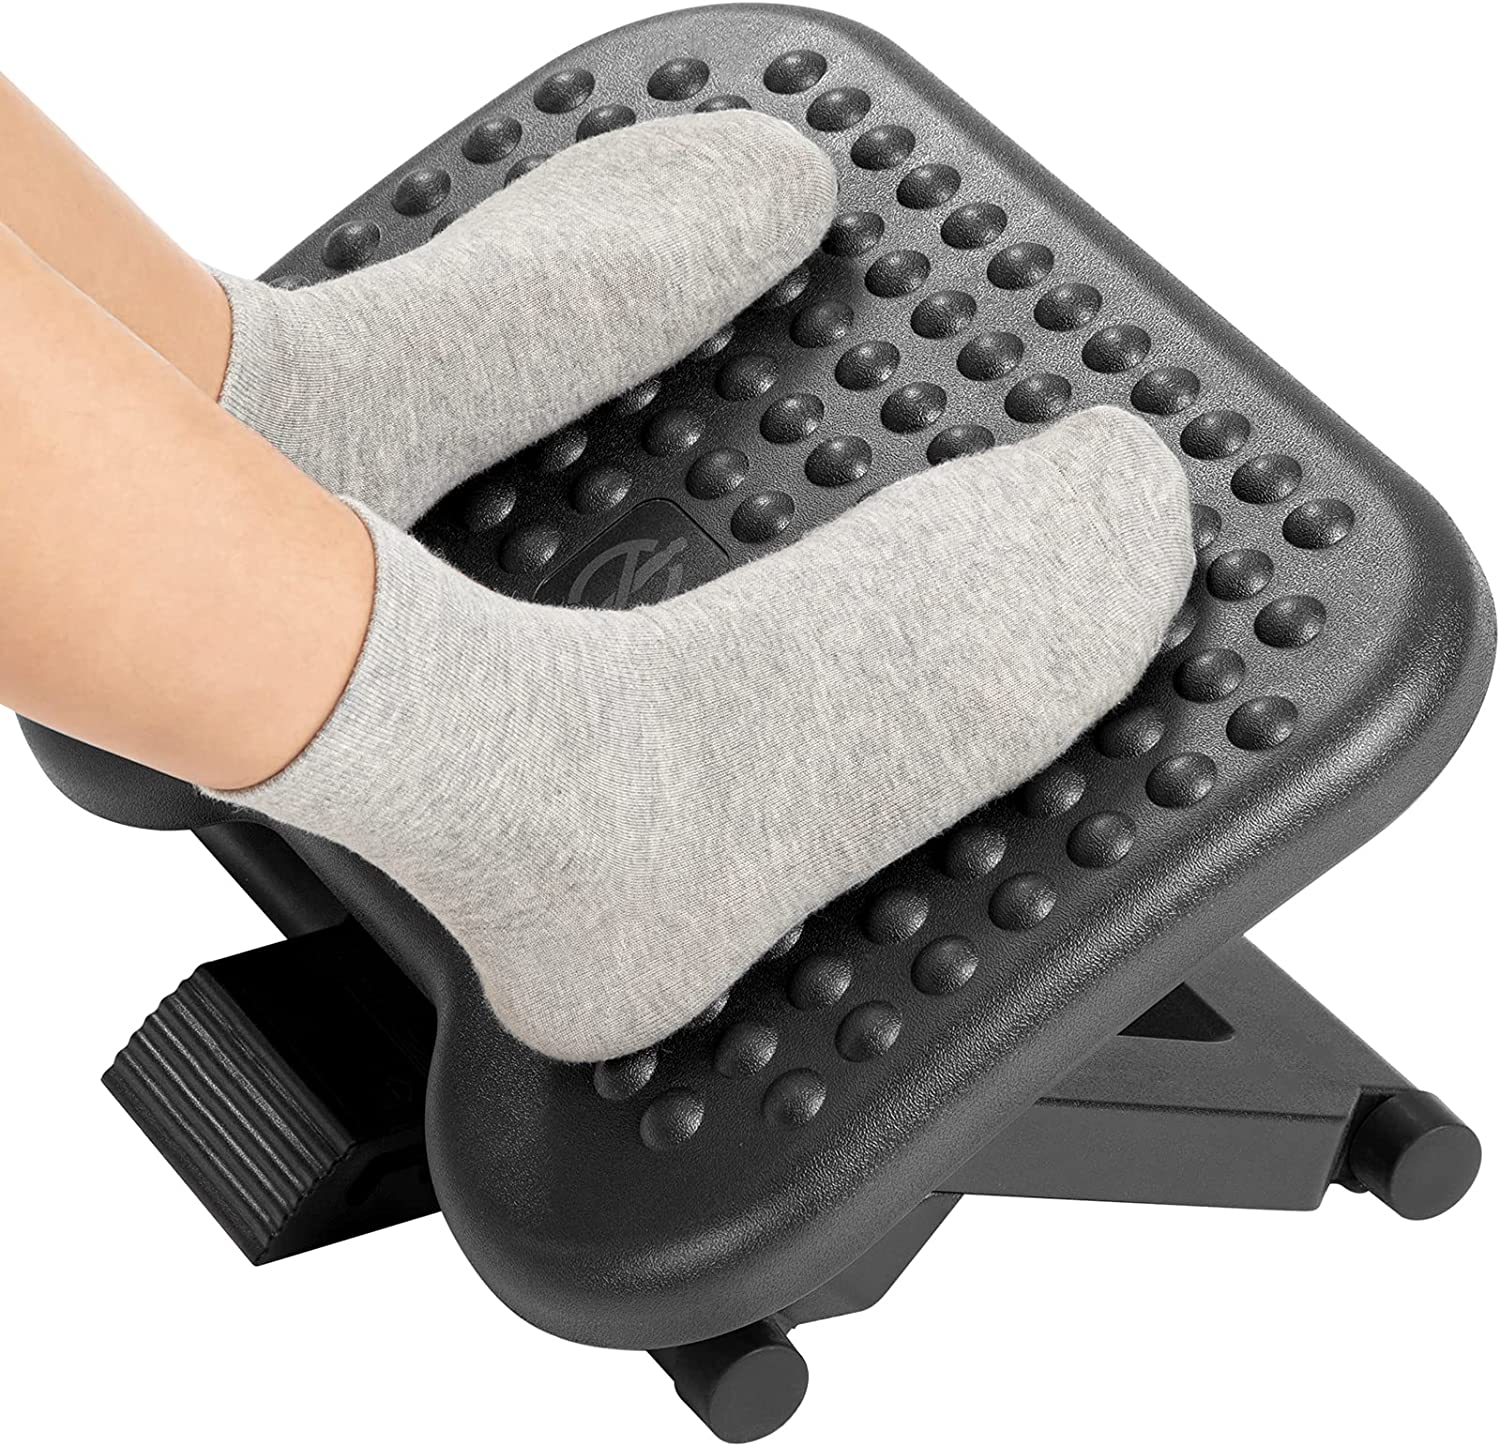 SMAGREHO Portable Adjustable Mini Office Foot Rest Stand Desk Foot